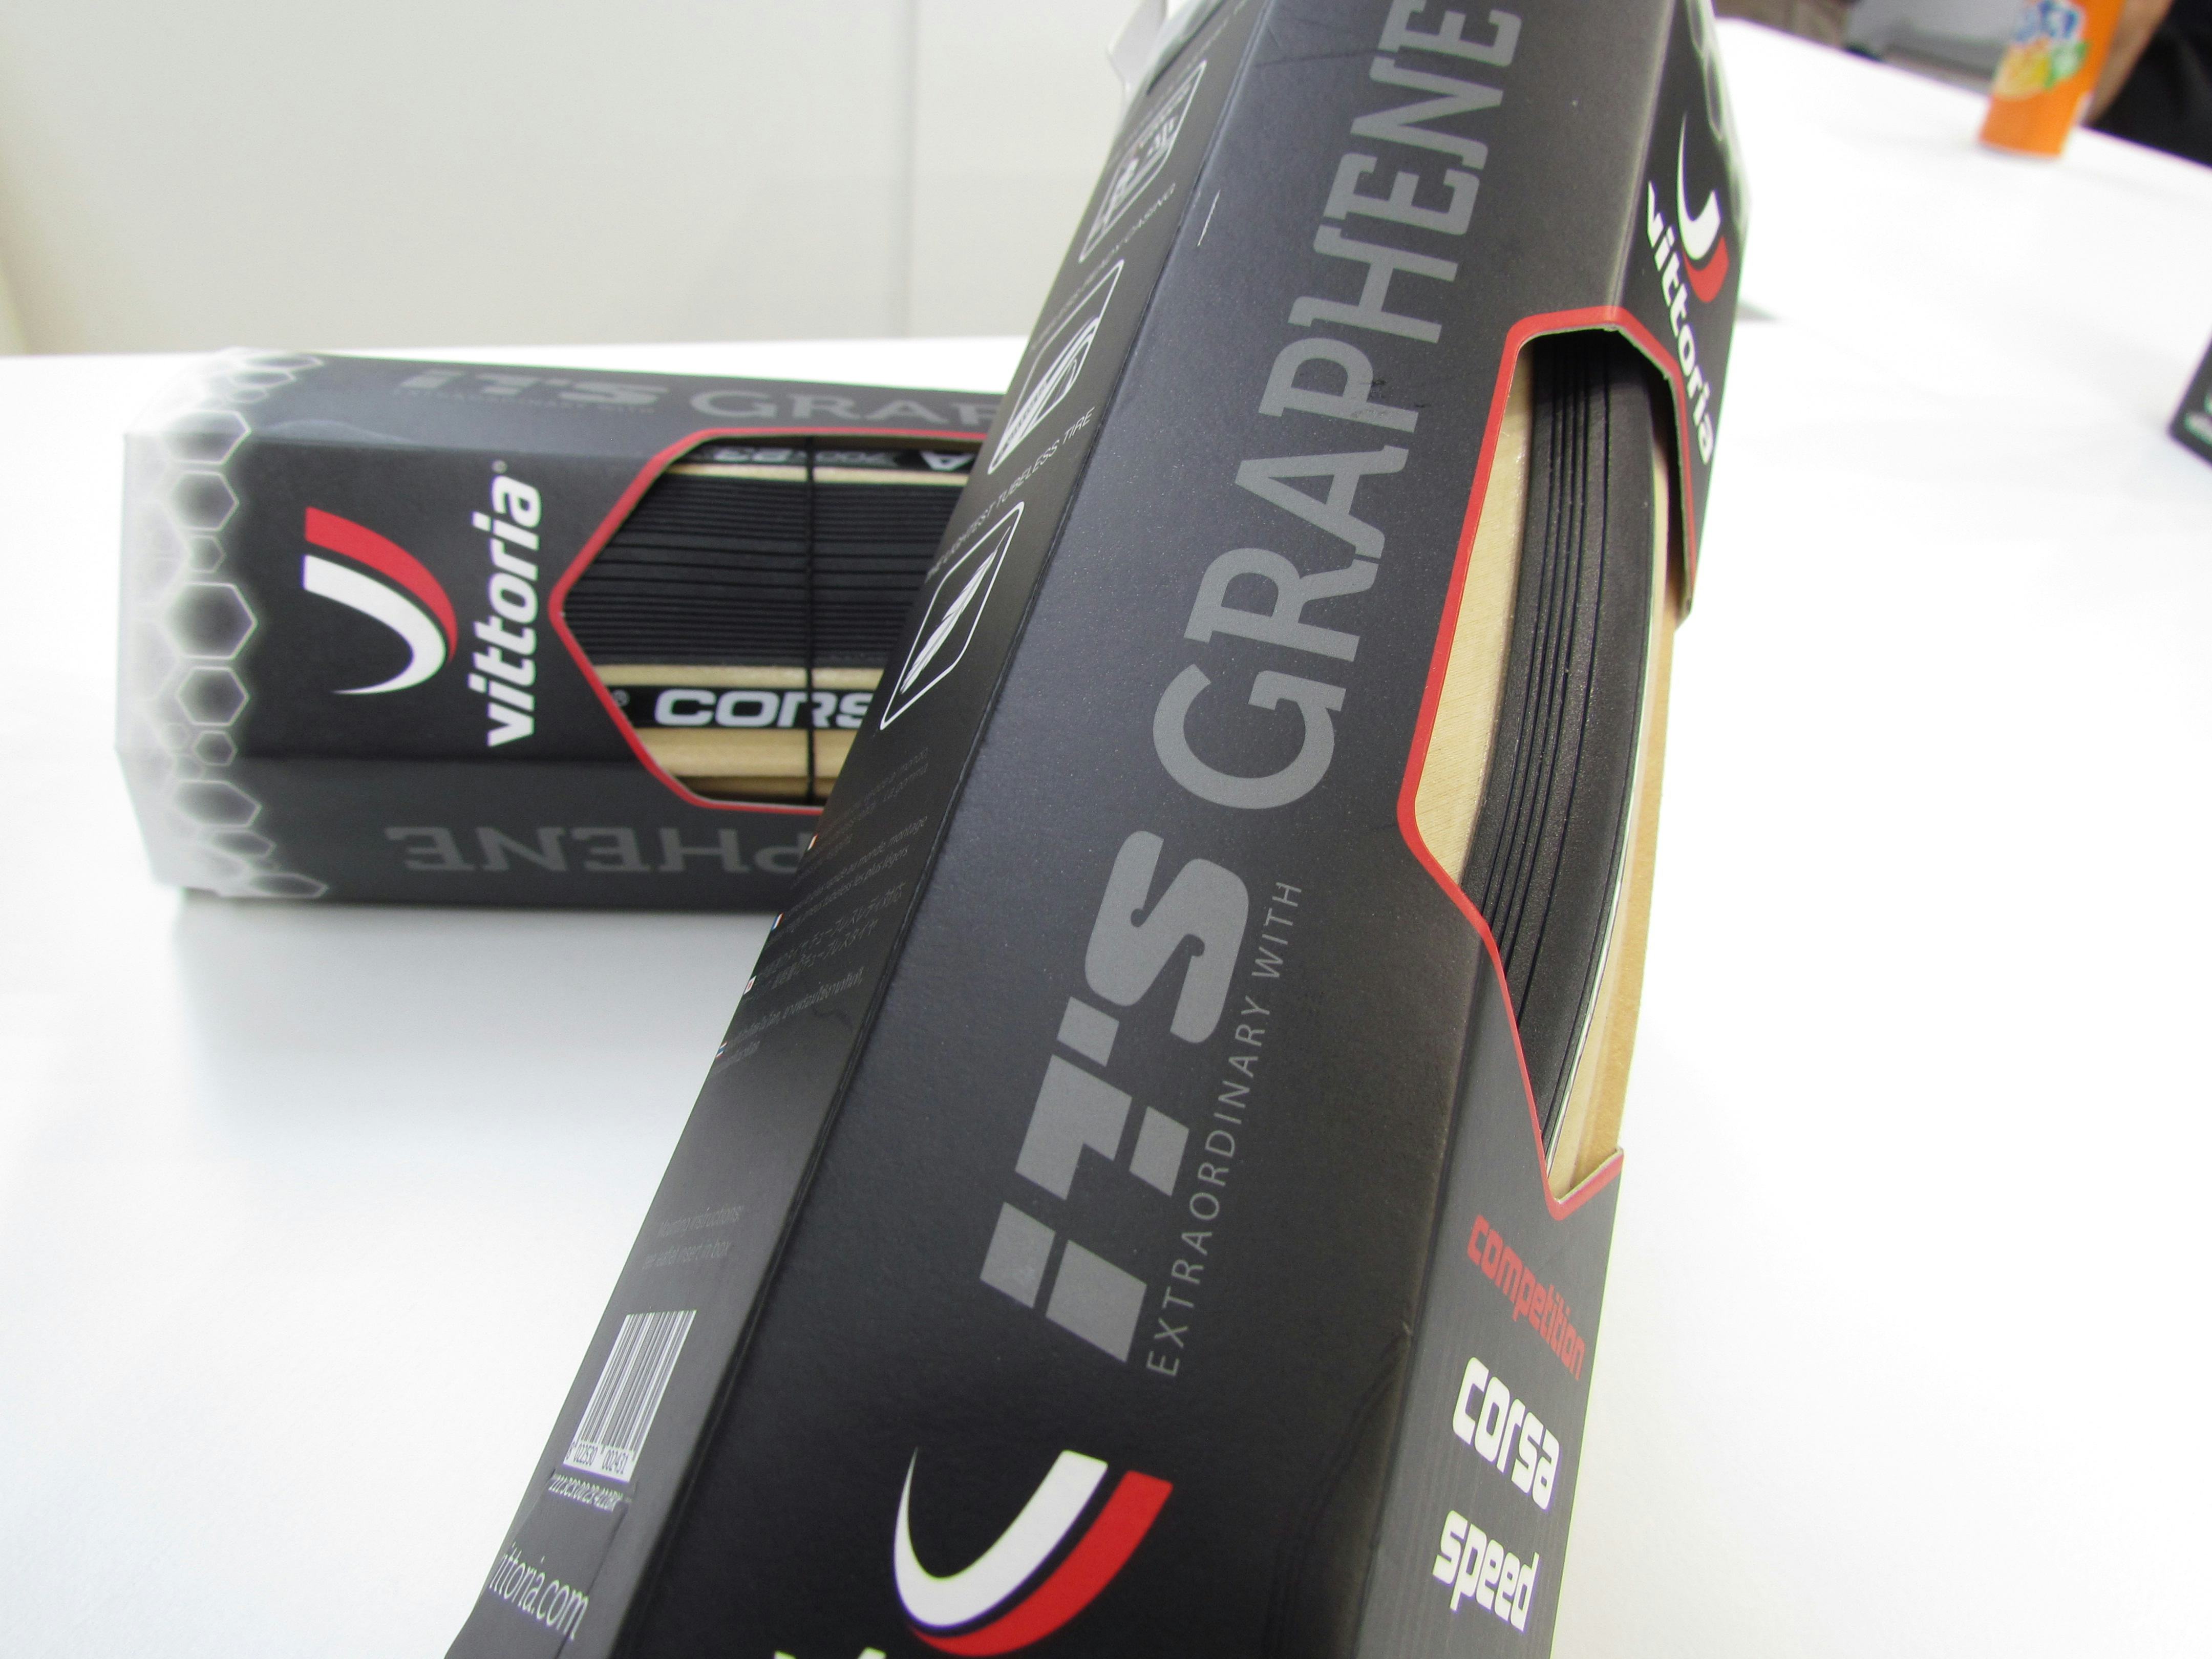 Vittoria’s new Corsa Speed tubeless road tyre with cotton casing and graphene added rubber compound. – Photo Bike Europe